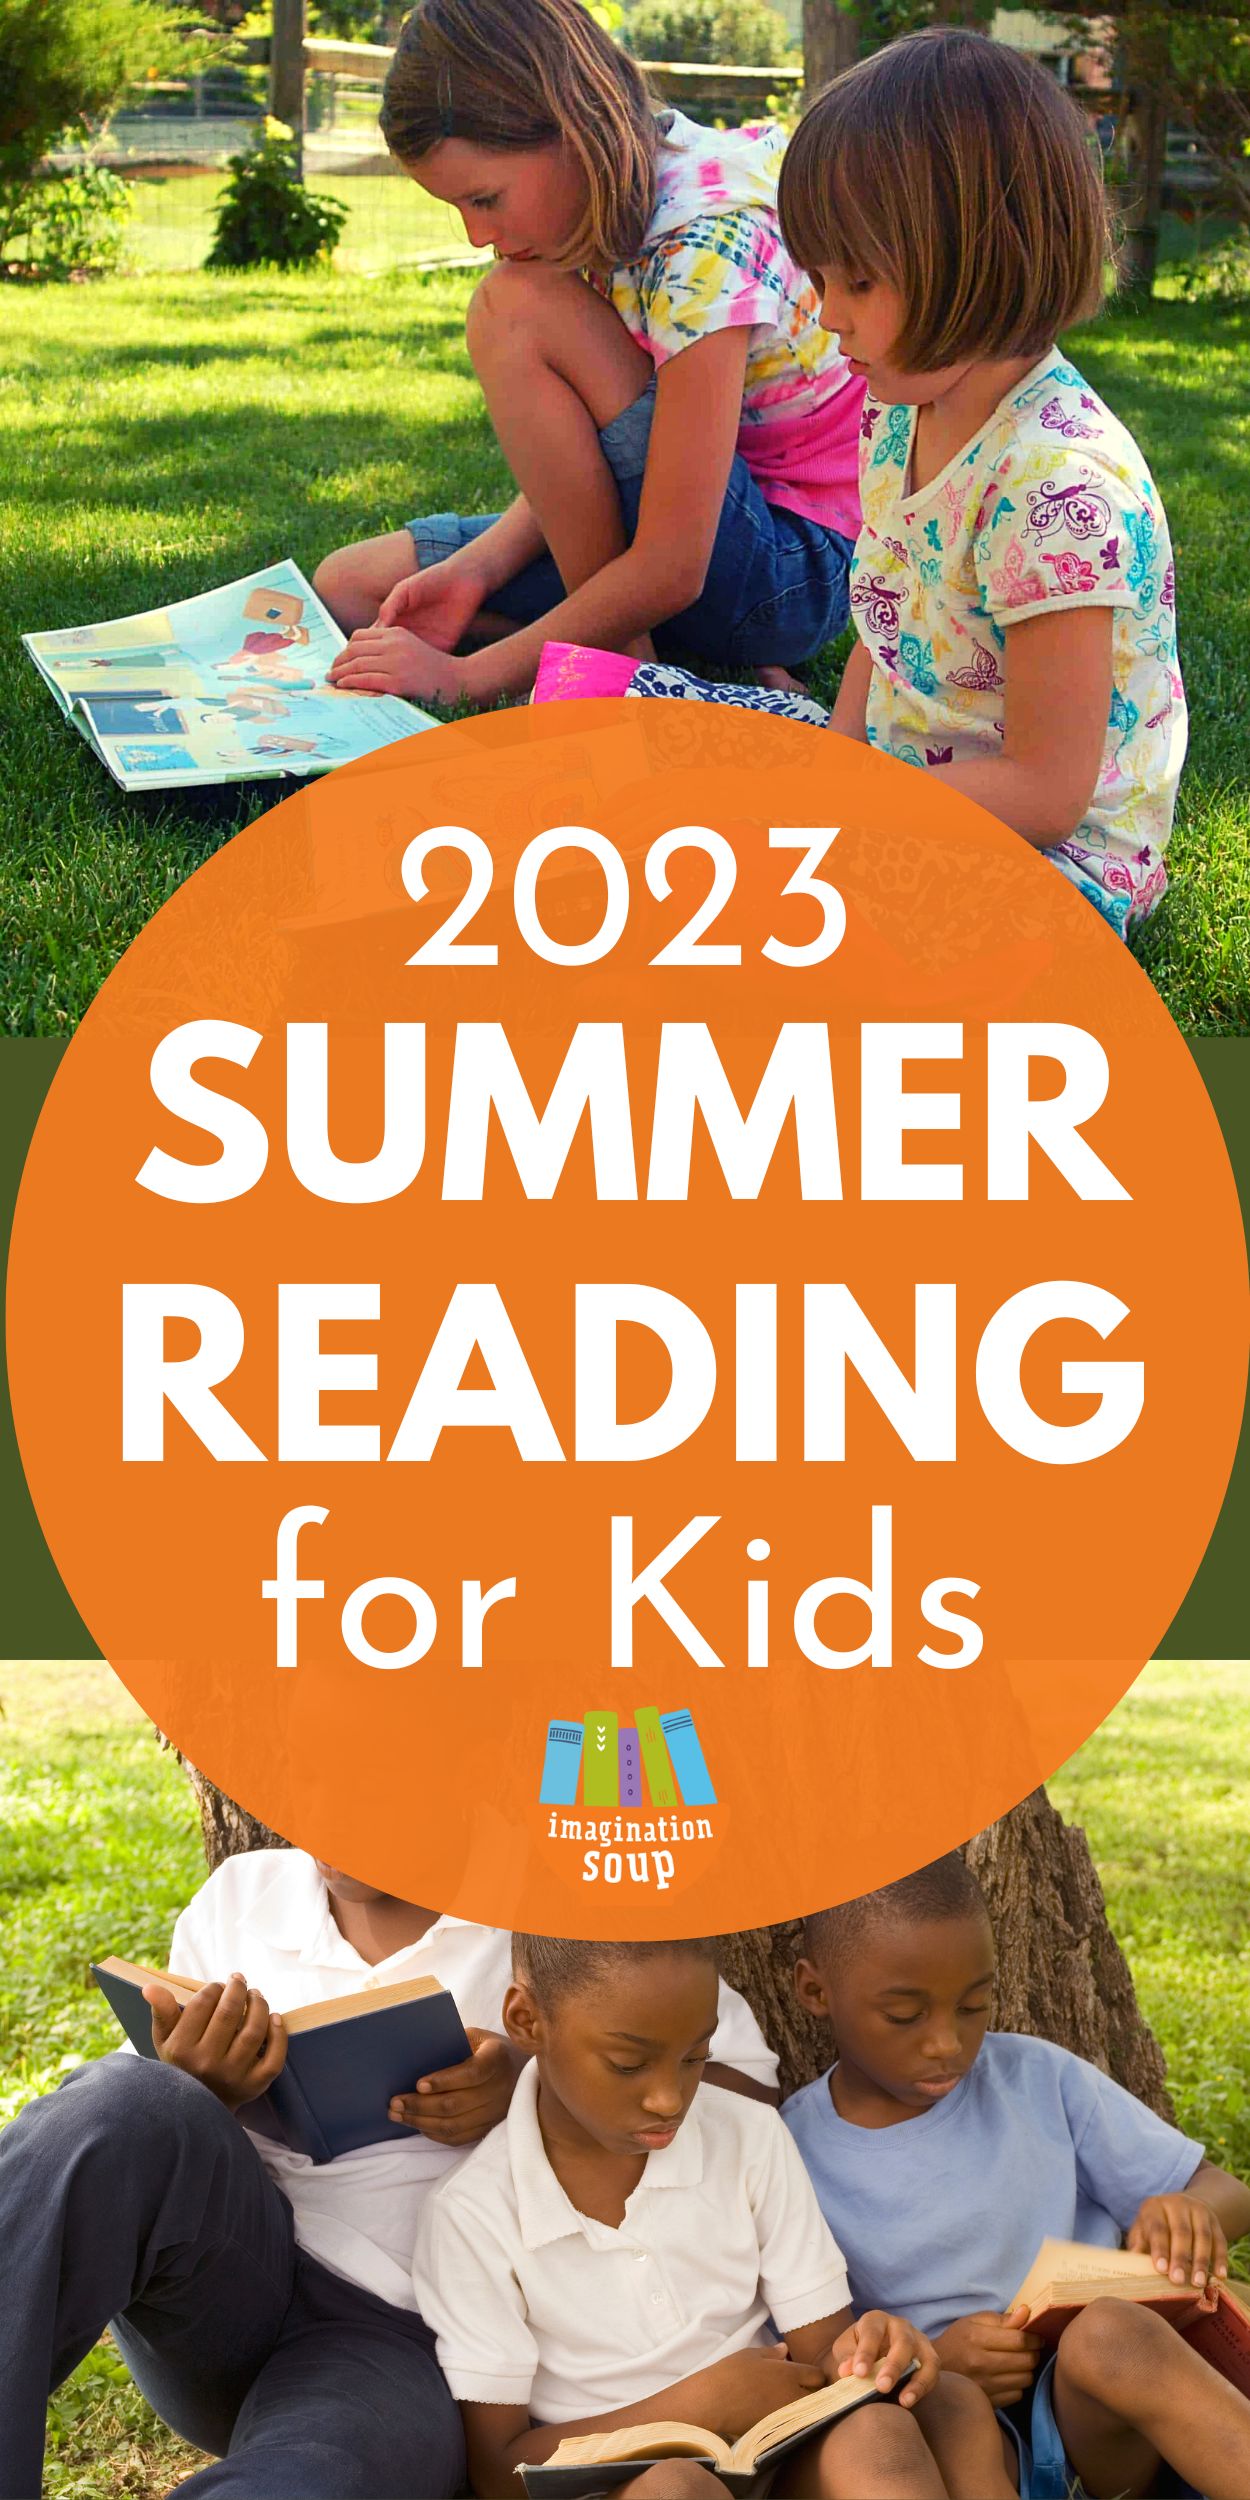 Get your kids, ages 5 to 18, reading with book recommendations from these up-to-date summer reading lists. These summer reading book lists are for every grade level, preschool, elementary school, middle school, and high school!!